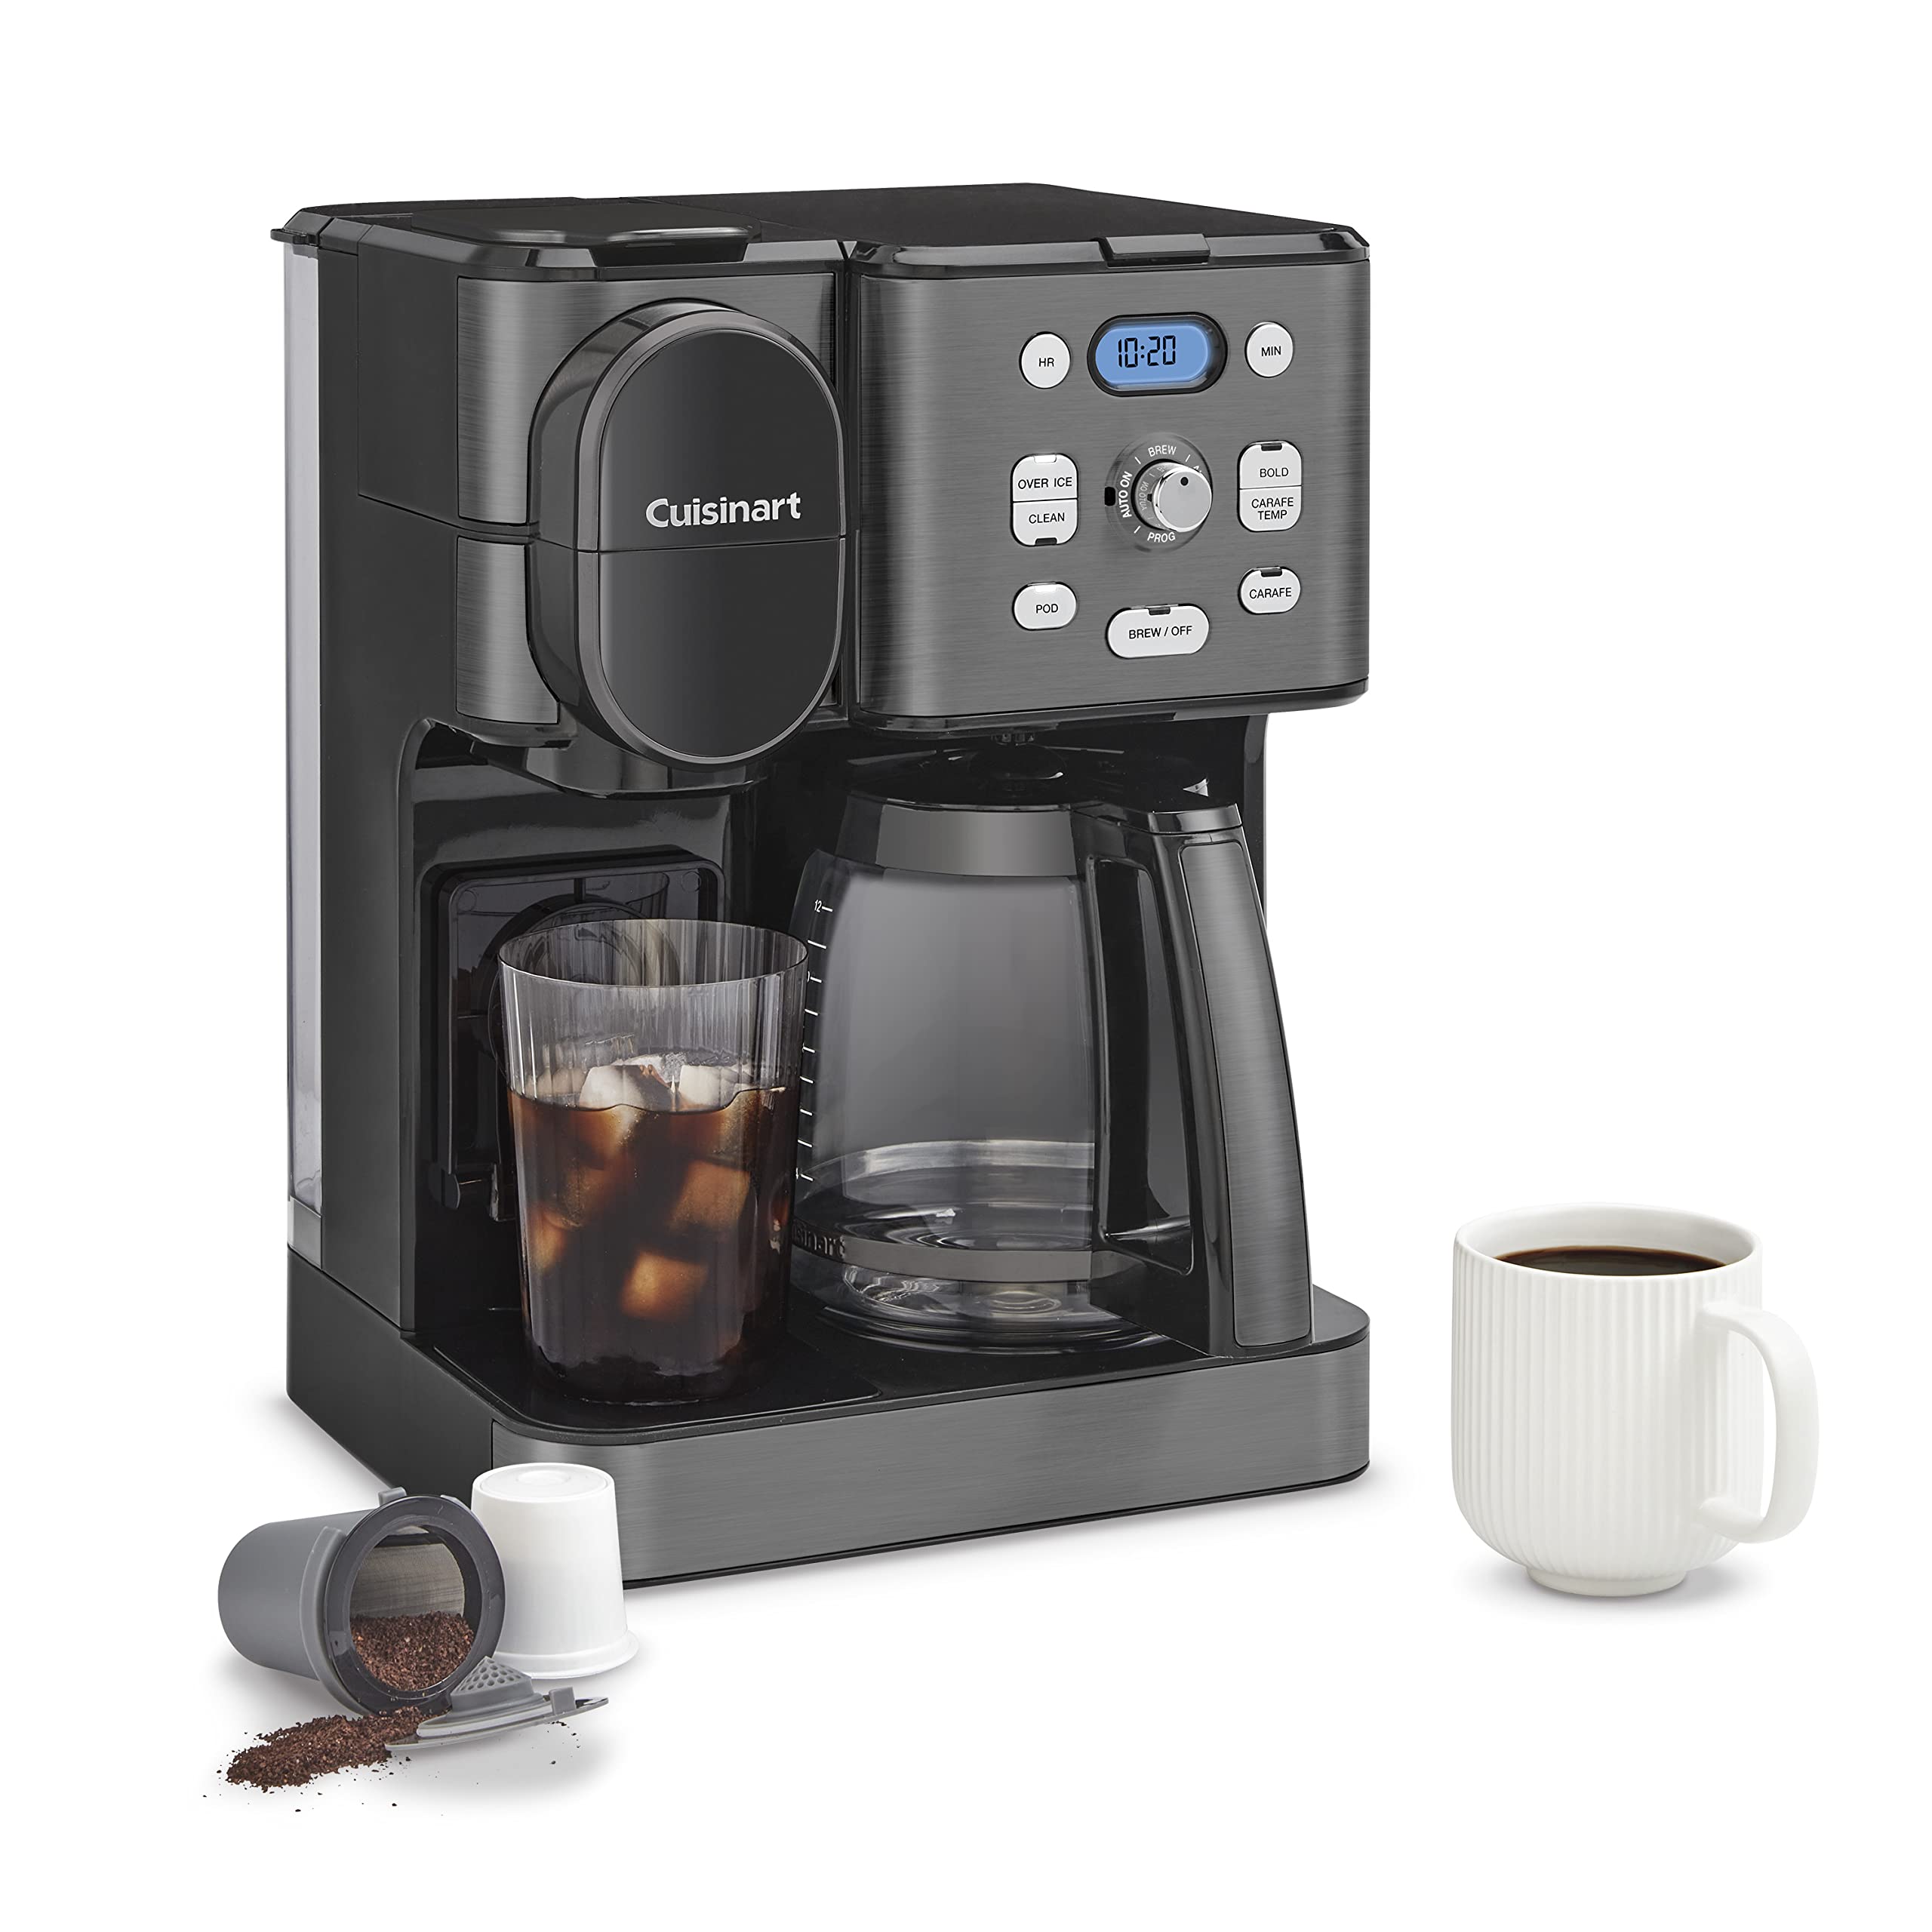 Cuisinart Coffee Maker, 12-Cup Glass Carafe, Automatic ...